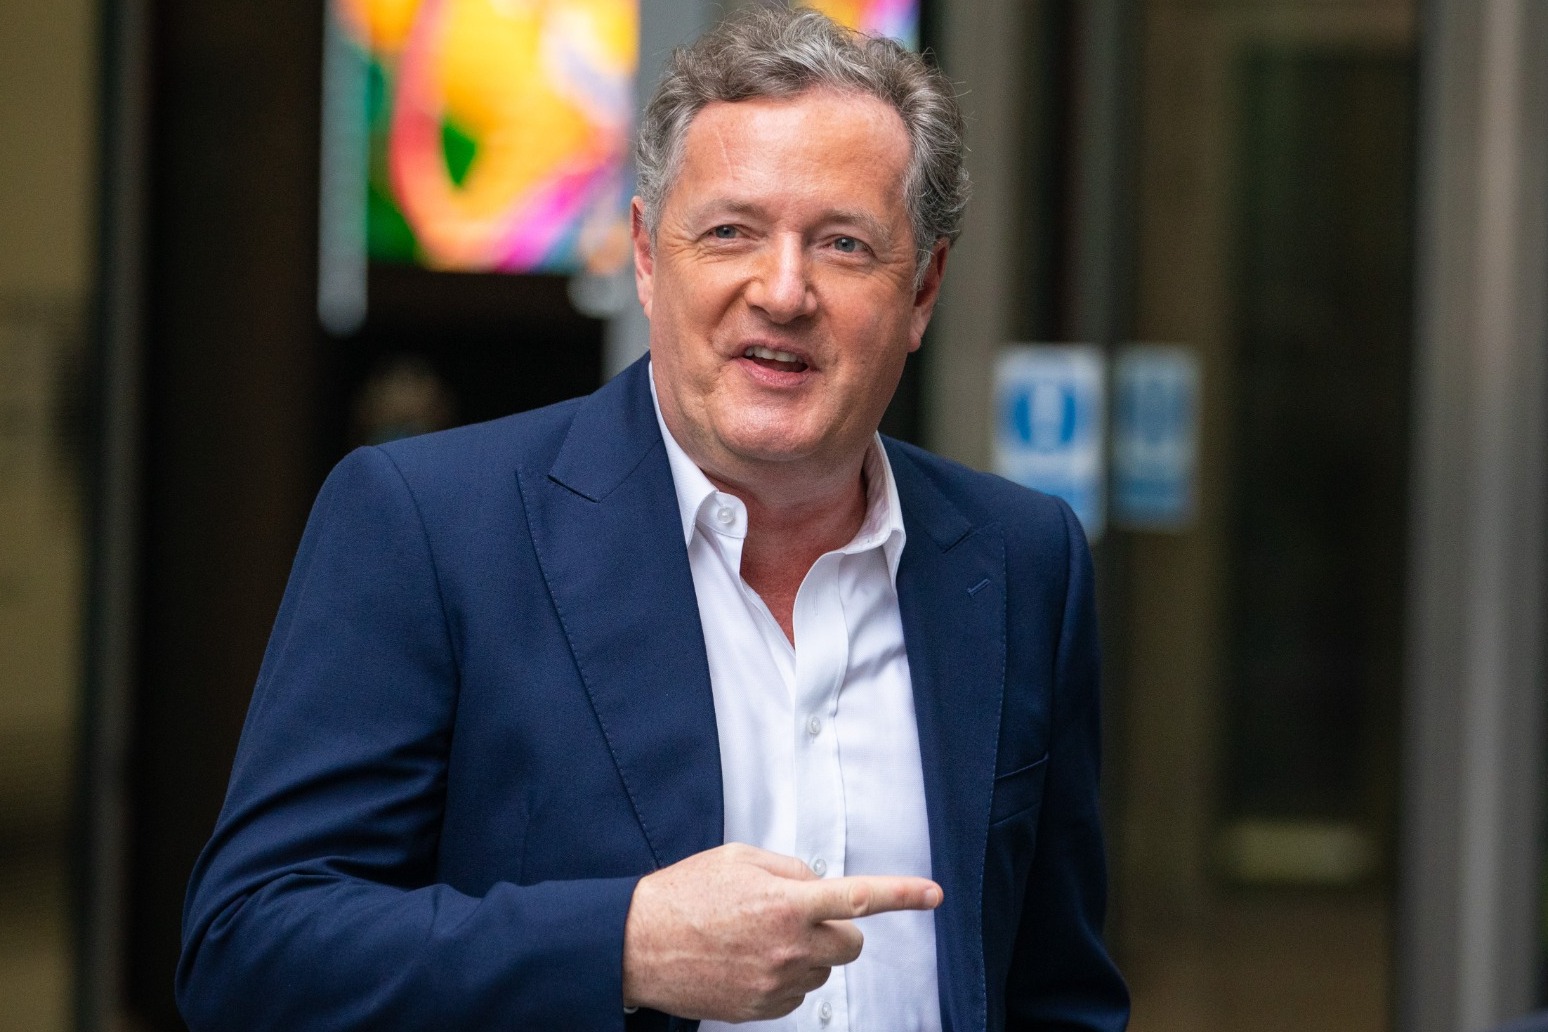 Piers Morgan says Good Morning Britain exit over Meghan comments was a farce